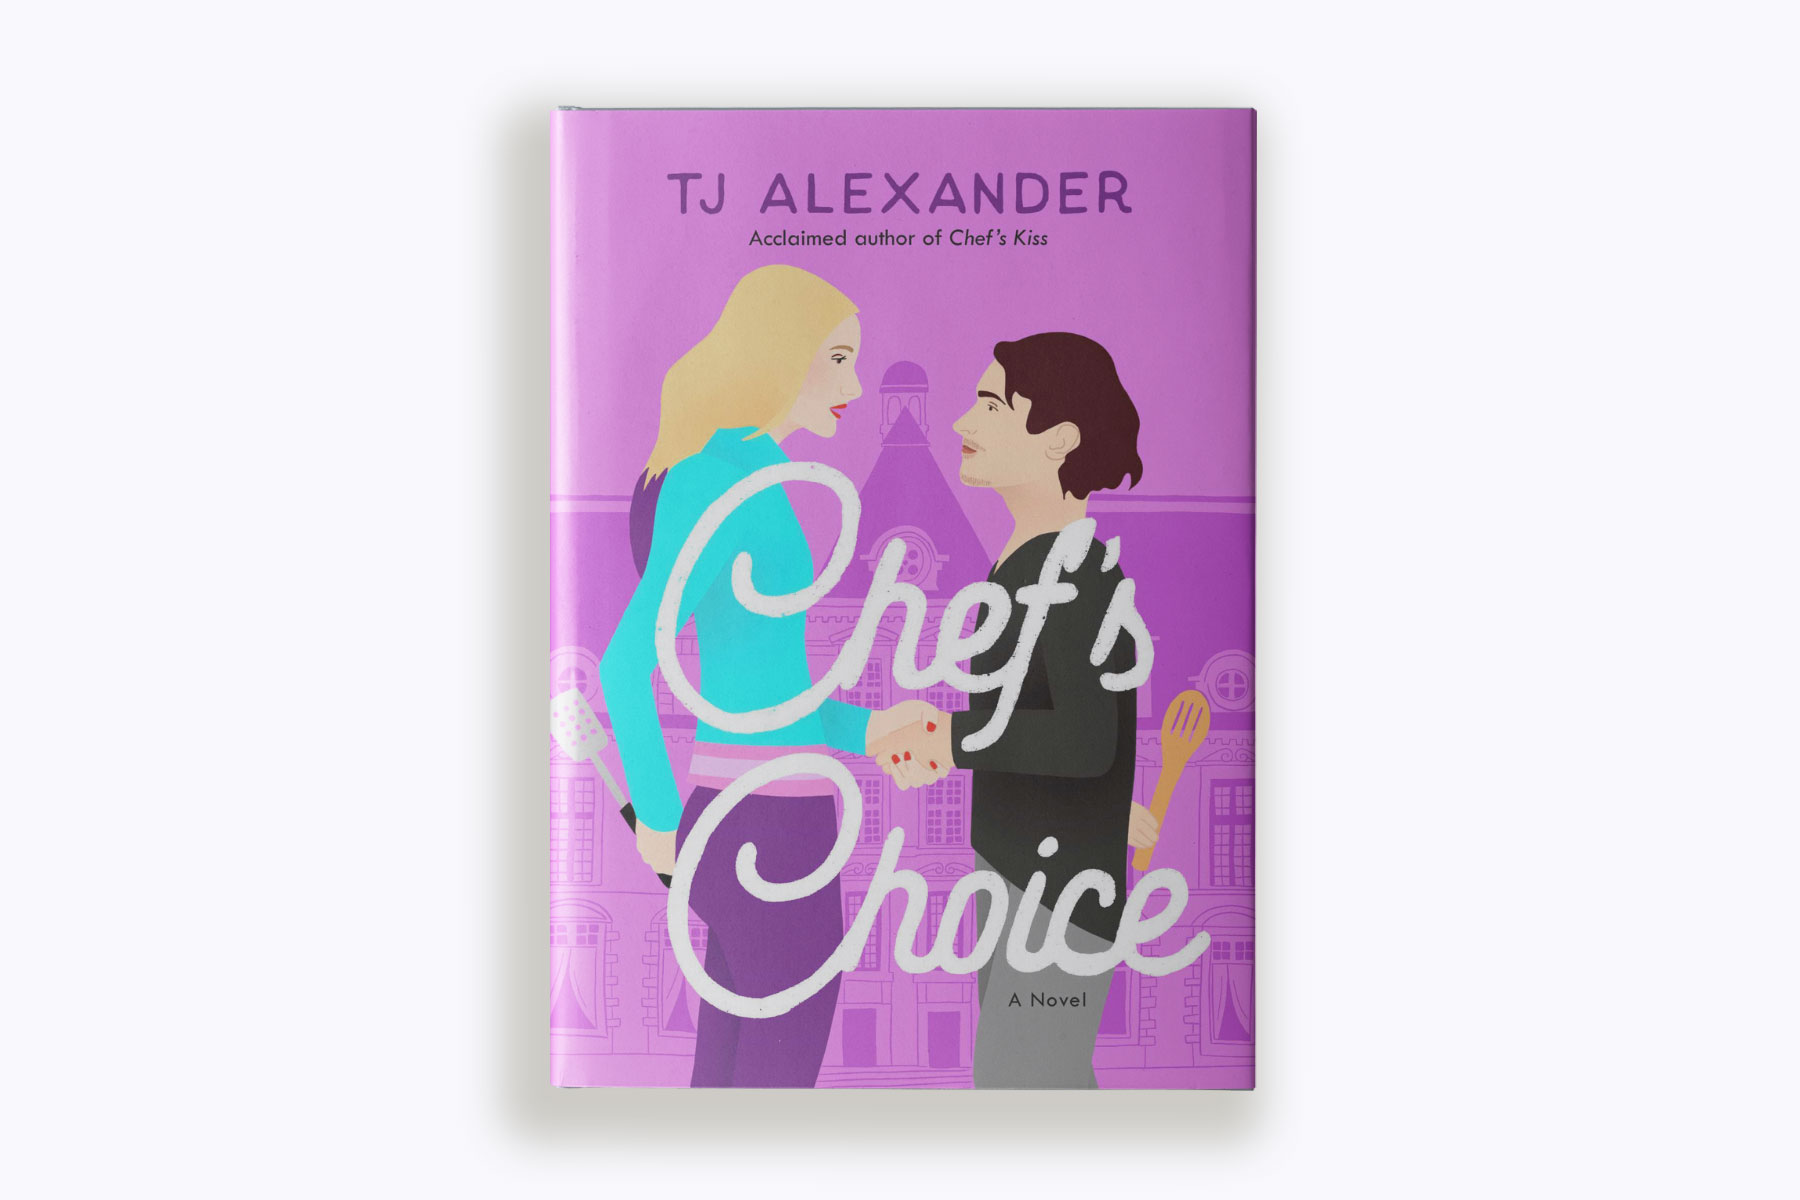 Chefs Choice author TJ Alexander on why rom-coms mirror trans experiences